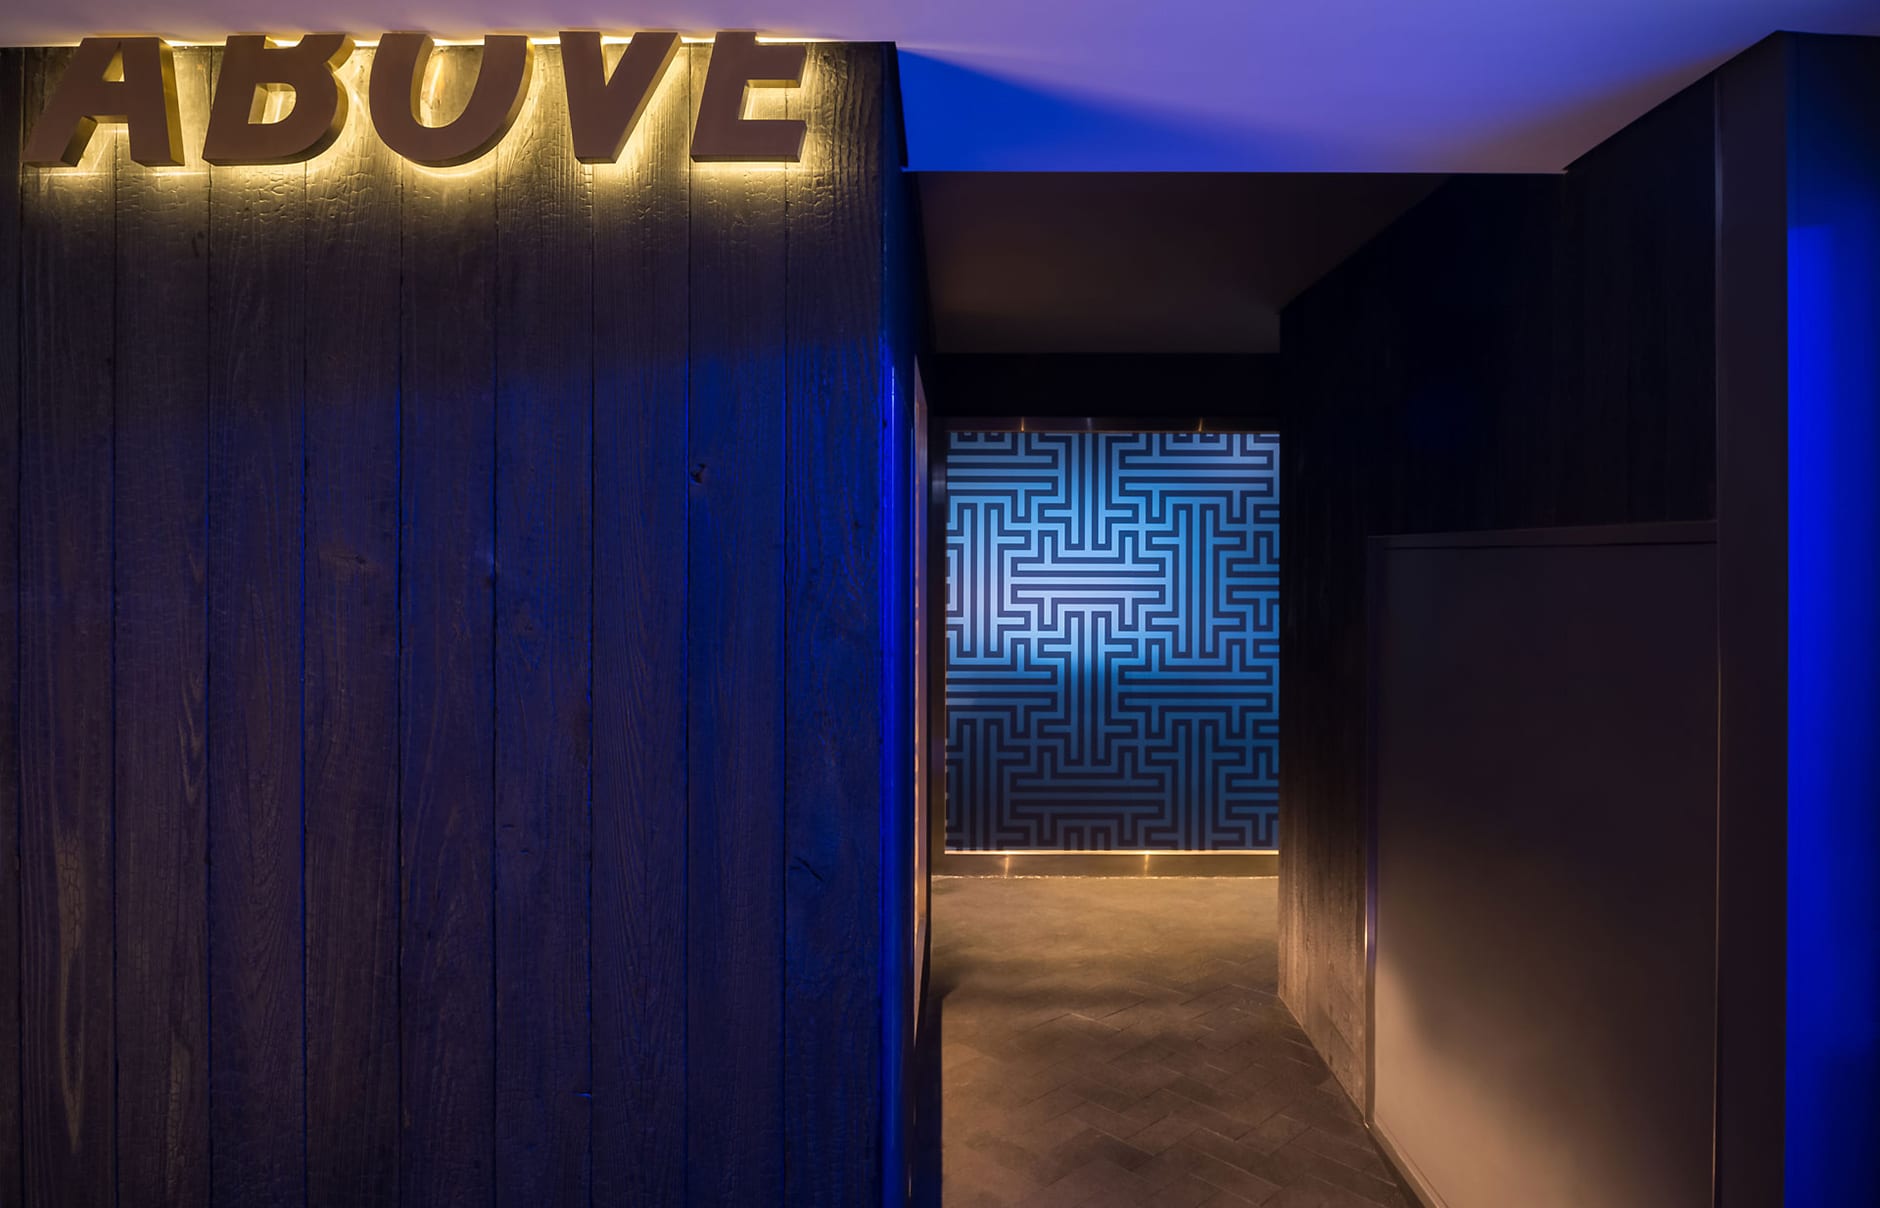 Ovolo Southside, Hong Kong, China. Hotel Review by TravelPlusStyle. Photo © Ovolo Group Limited